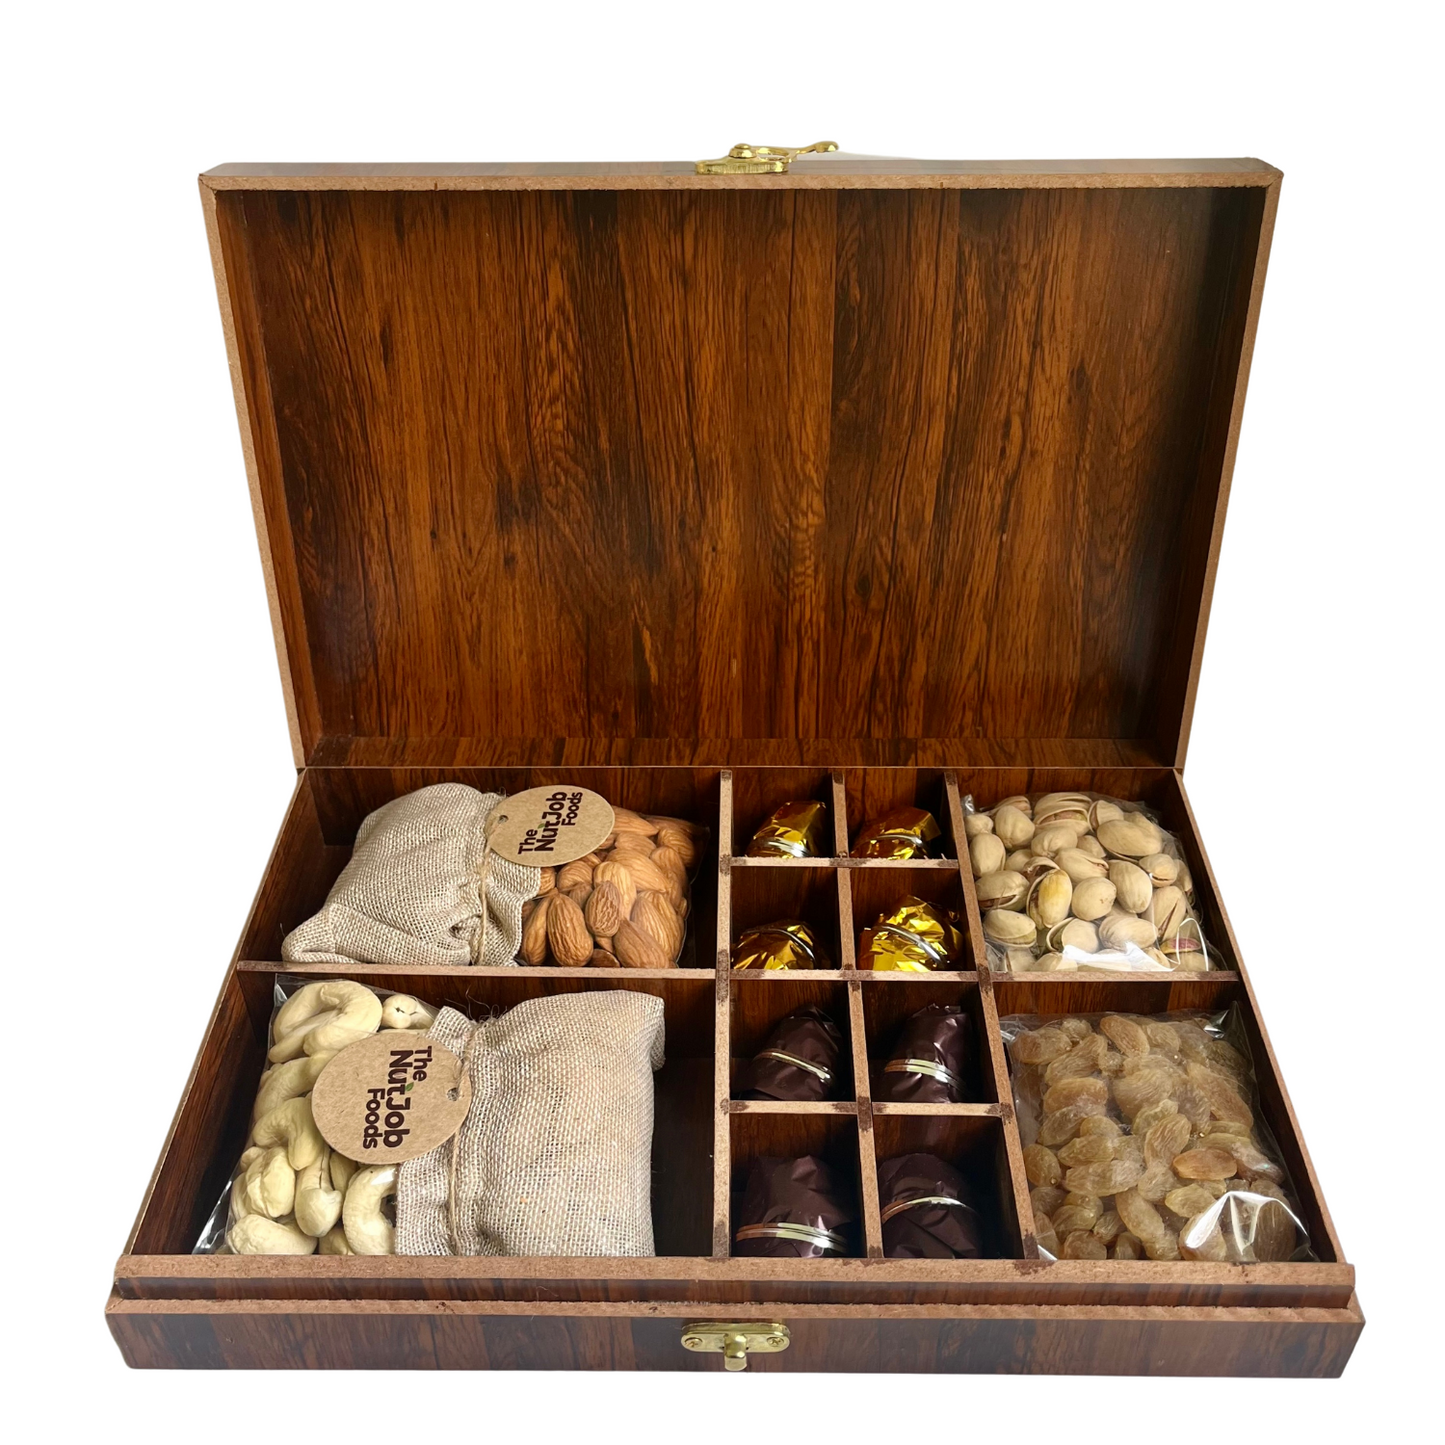 Dried Fruits & Nuts Premium Wooden Gift Box - Healthy Snacks, Nuts, Dried Fruits, Chocolate - Gift Box - 500g (Pista Box)